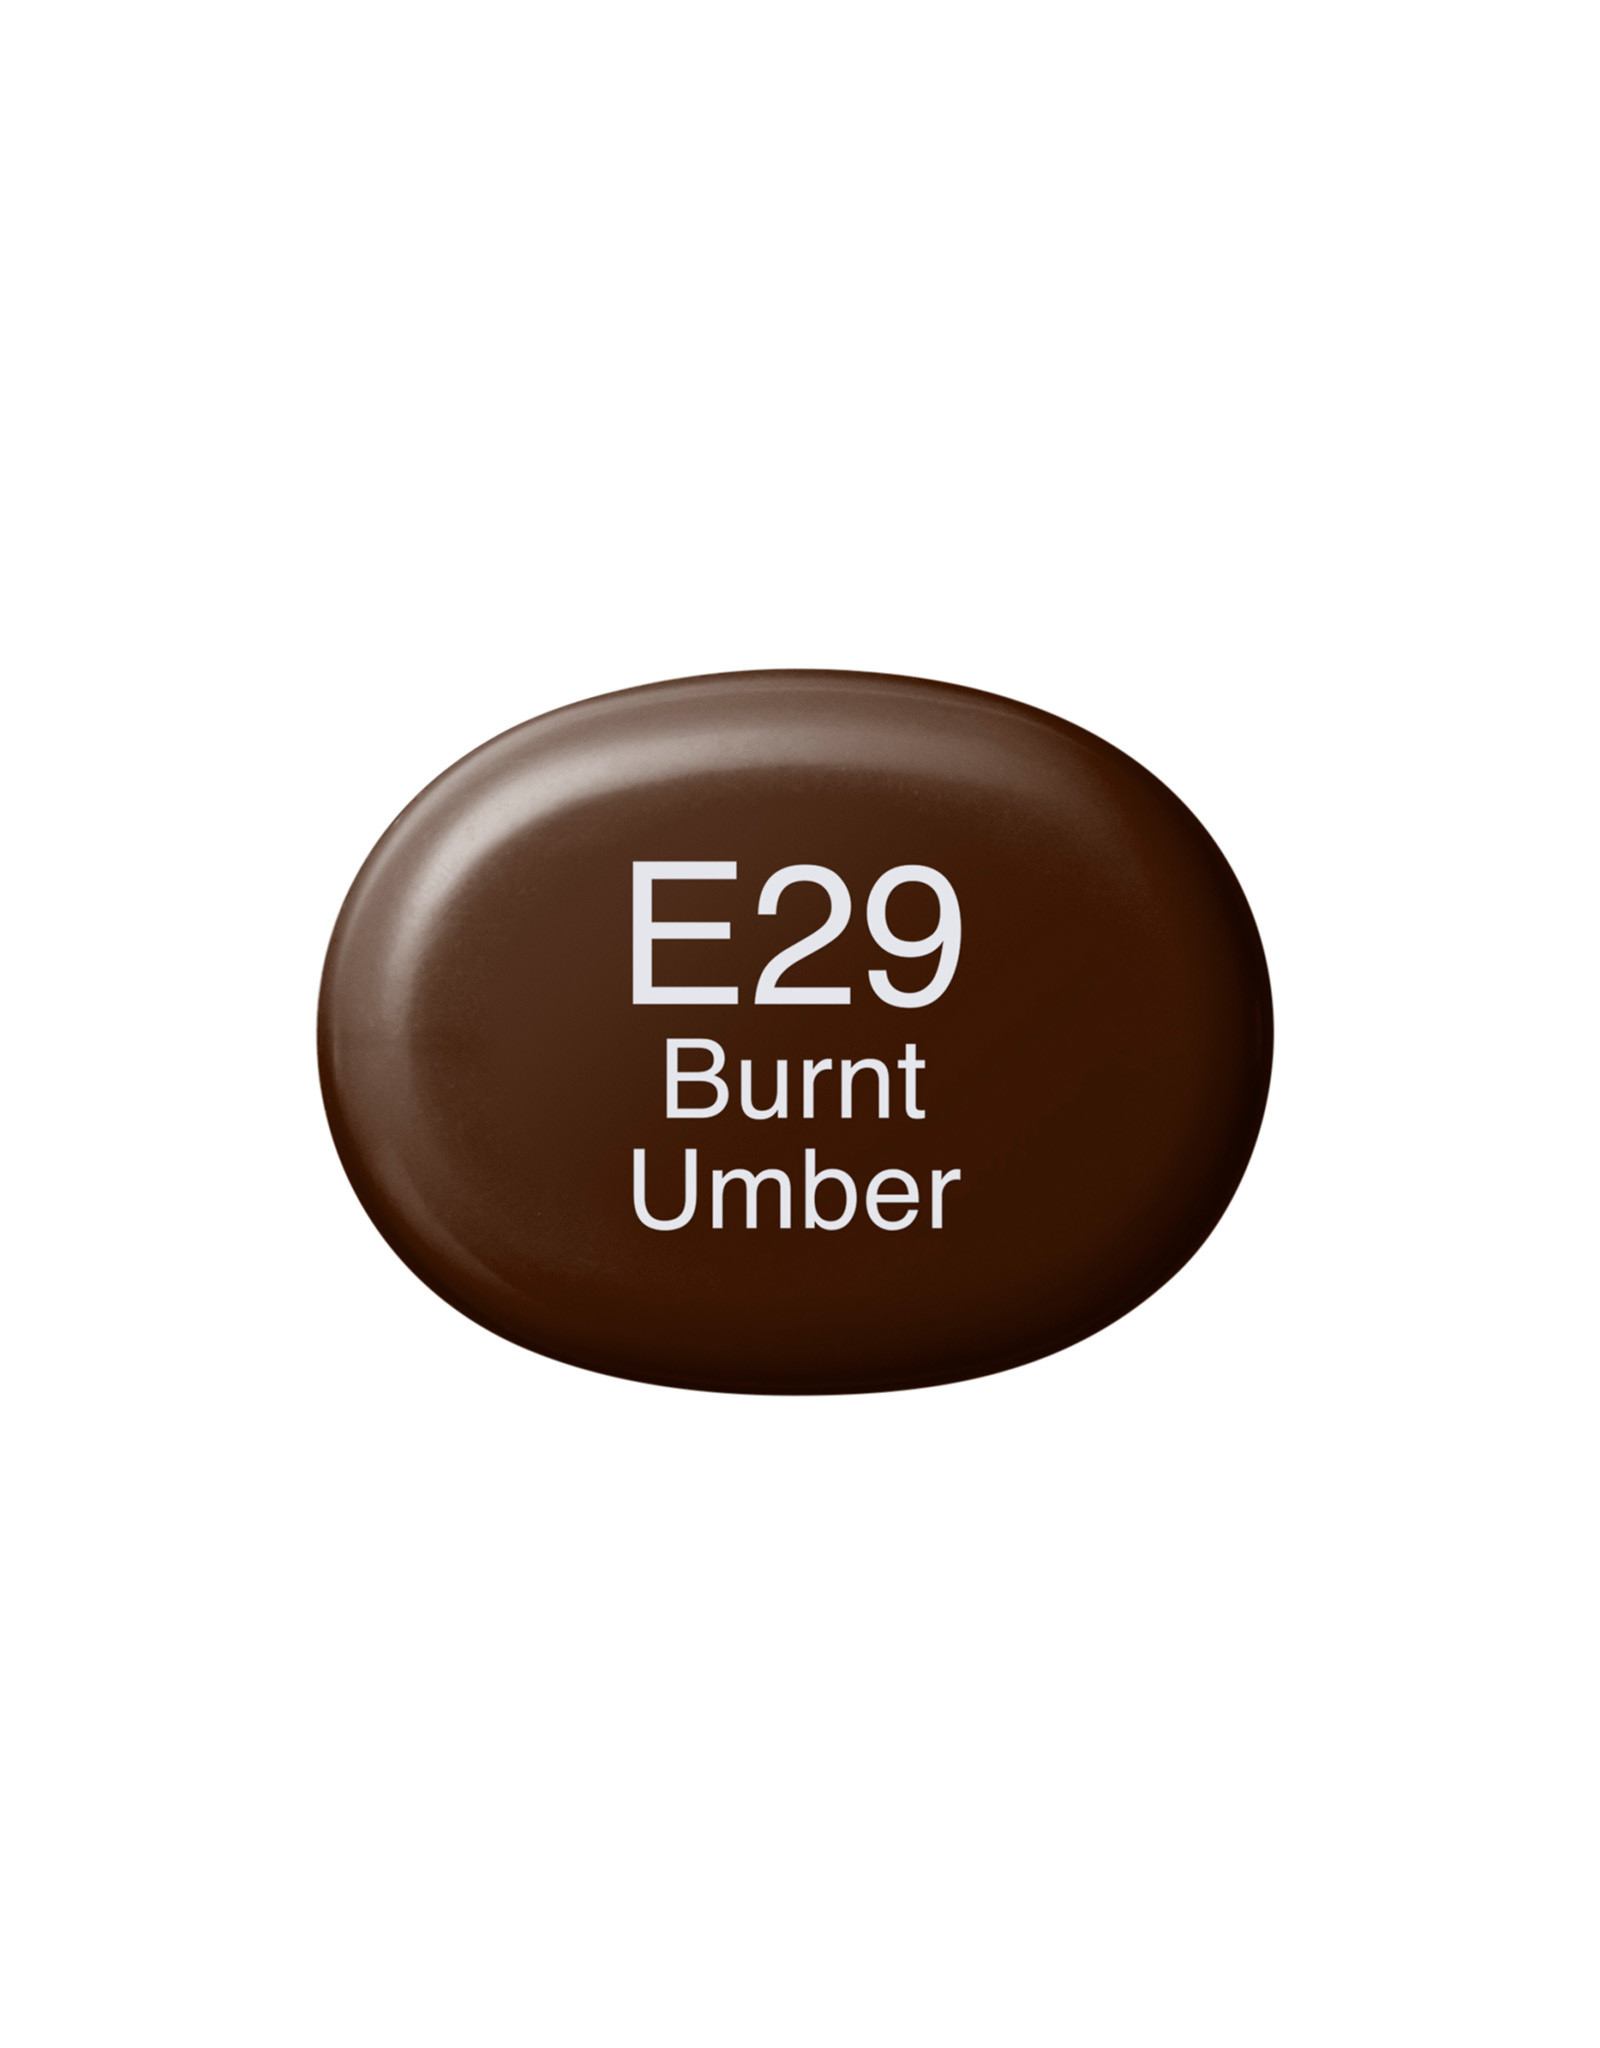 COPIC COPIC Sketch Marker E29 Burnt Umber